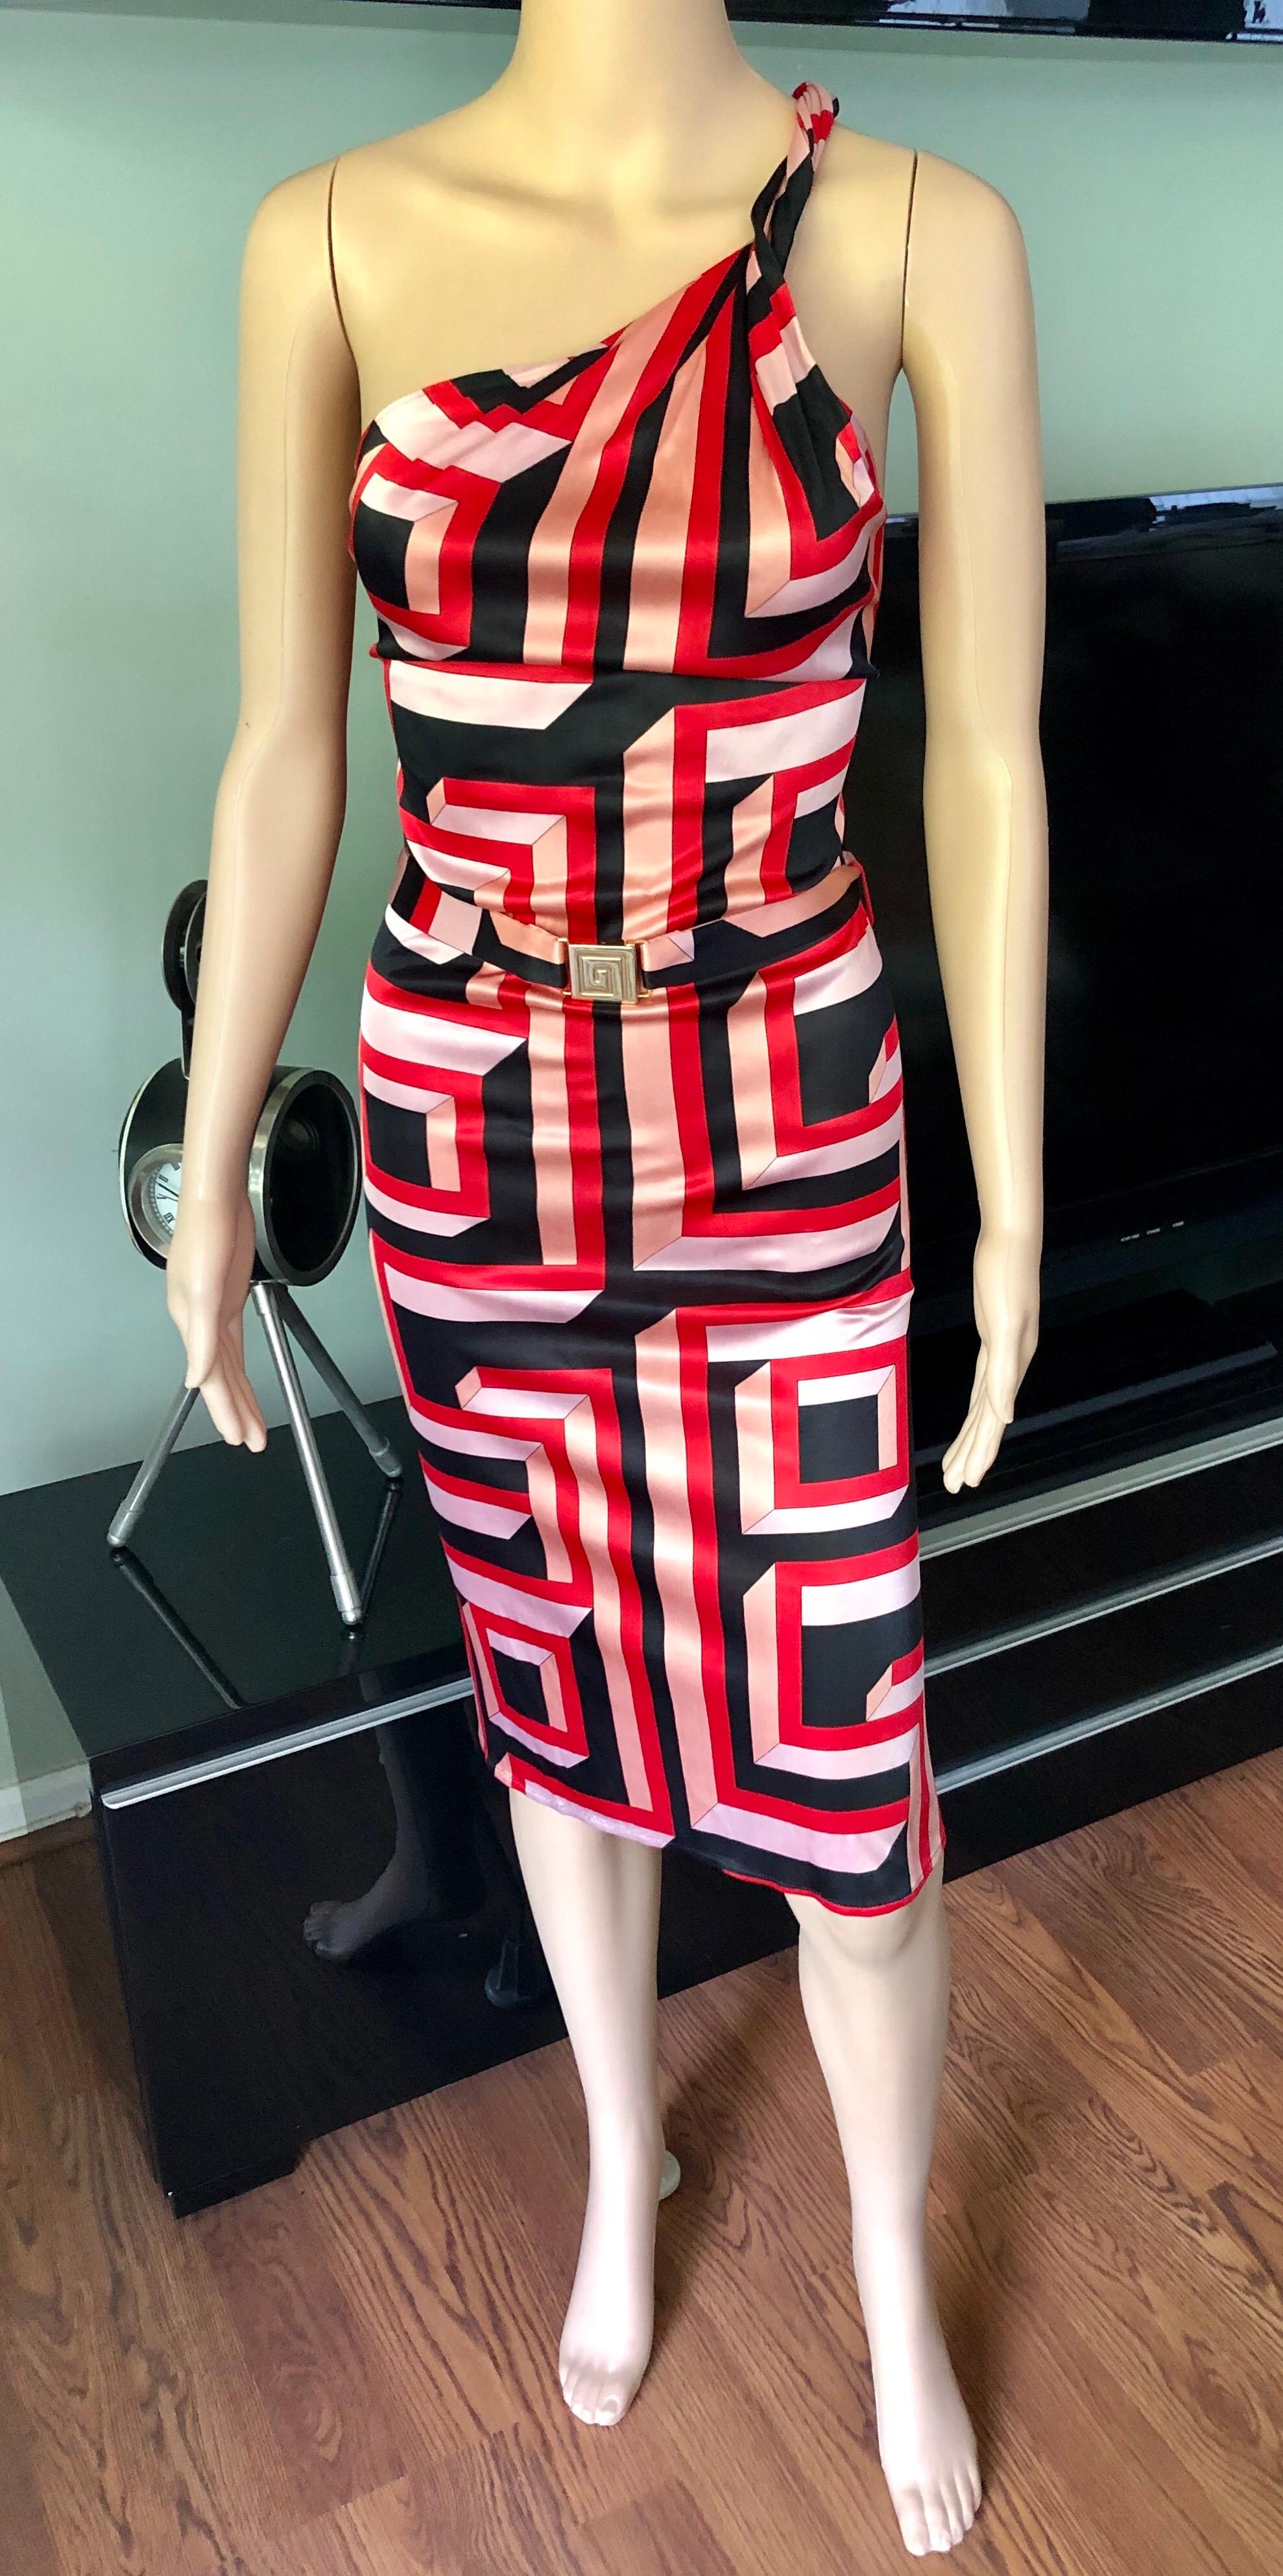 Gianni Versace S/S 2001 Vintage Geometric Print Belted Open Back Dress For Sale 1